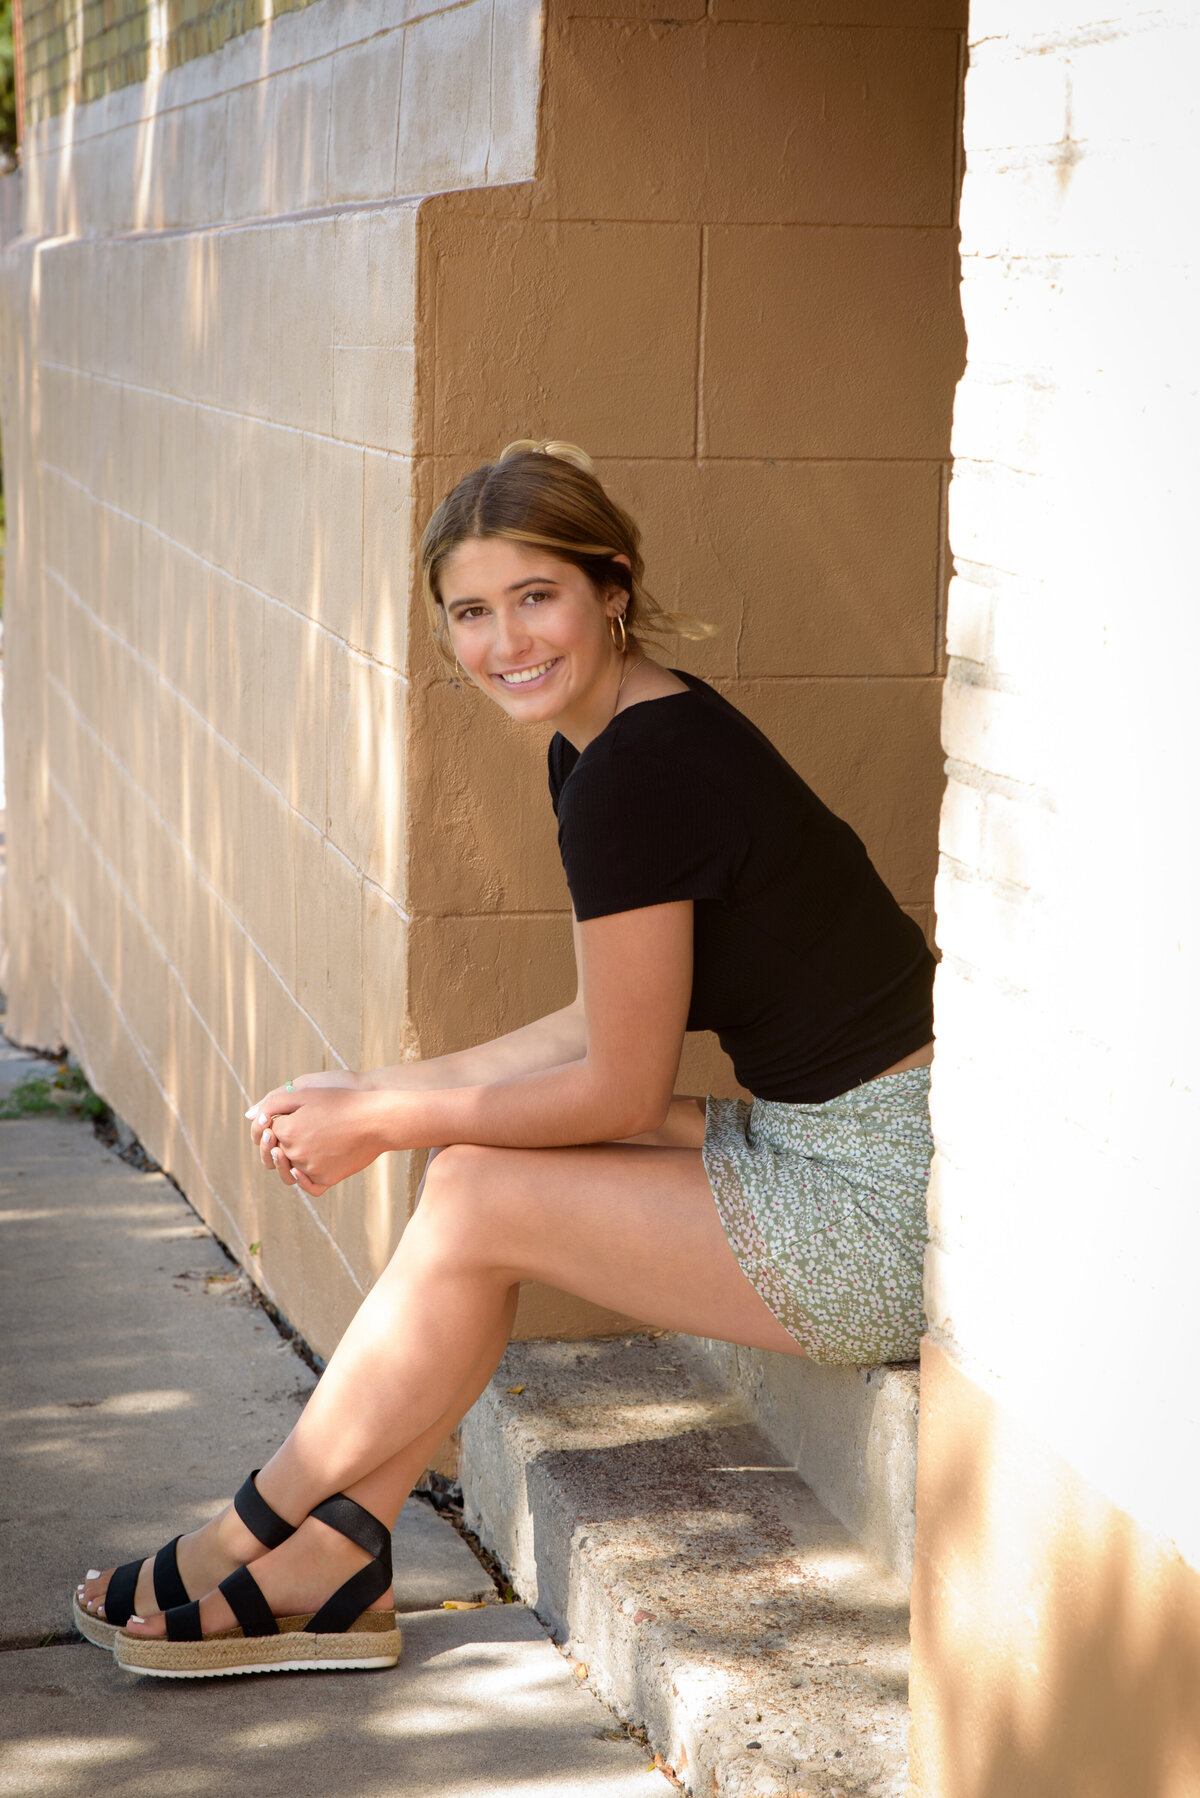 close up head shot of De Pere High School senior girl wearing a short green skirt and black shirt sitting on stairs in an urban setting near Voyager Park in downtown De Pere, Wisconsin